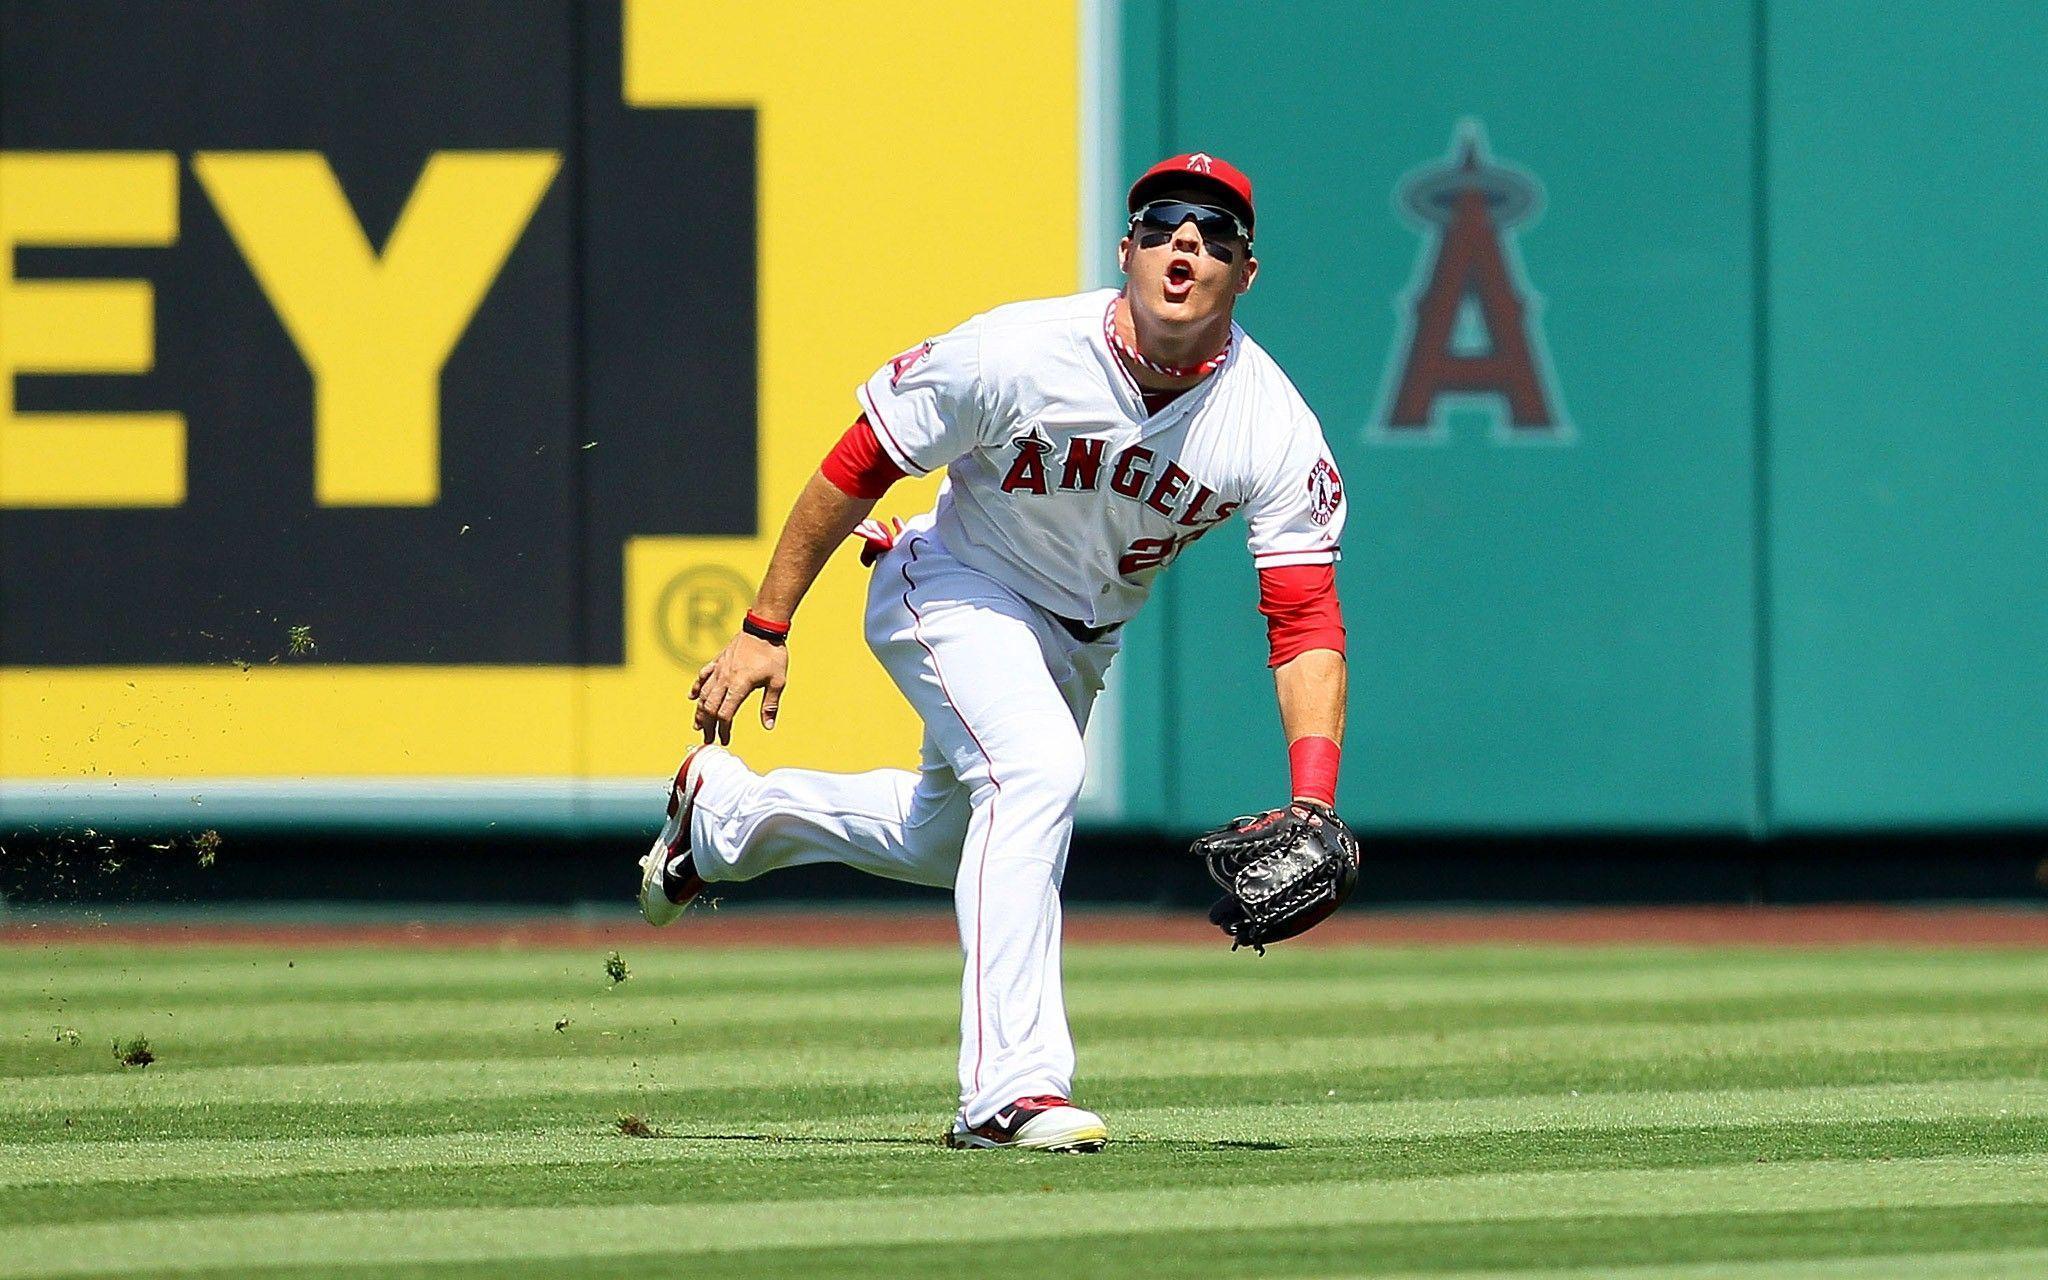 Mike Trout Famous American Baseball Player Wallpaper